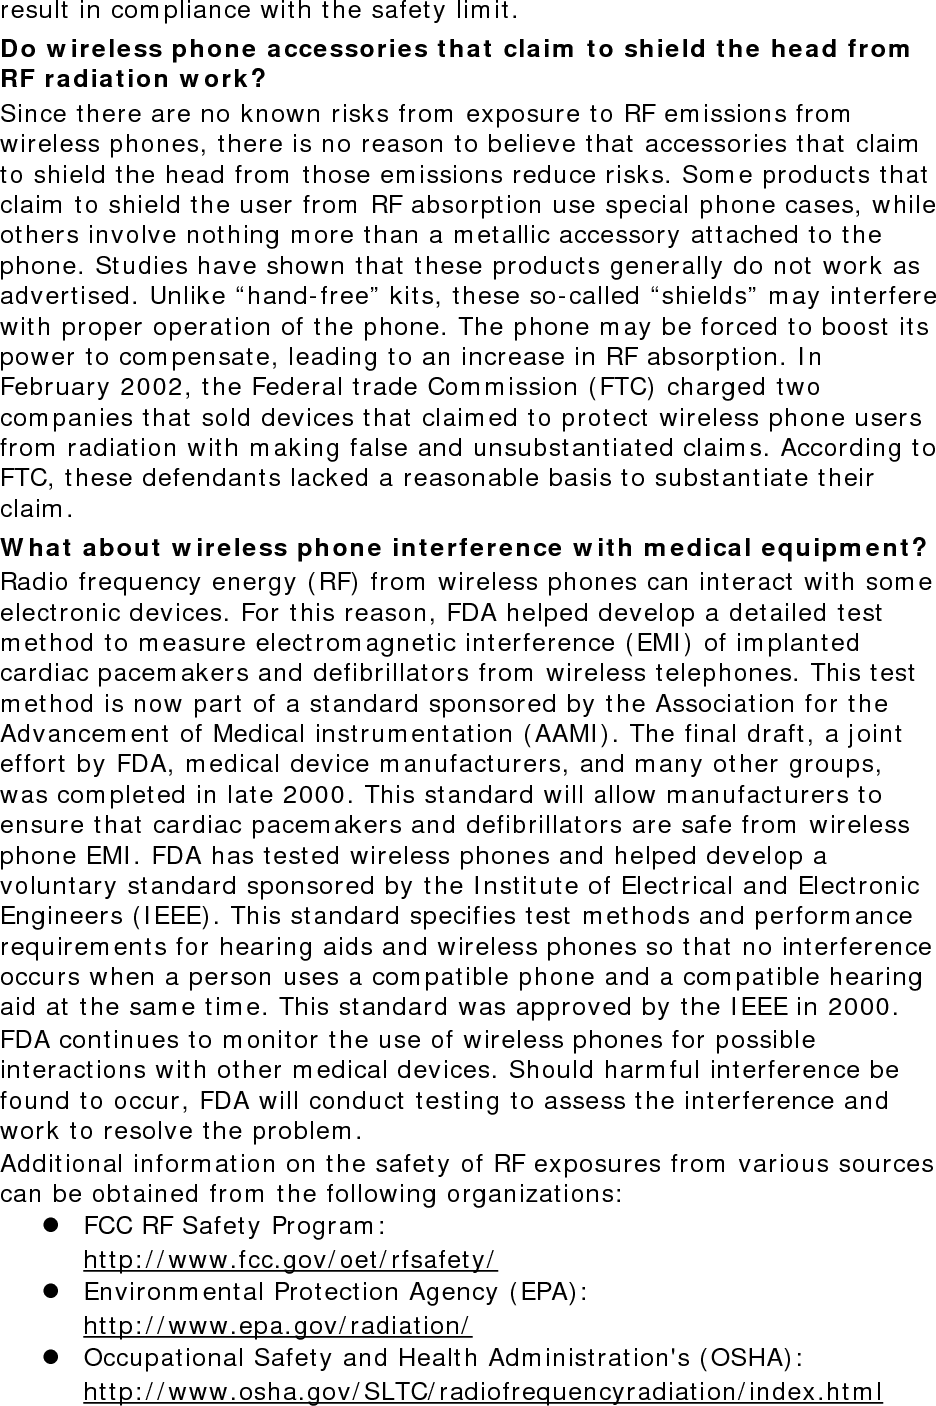 result in com pliance with t he safet y lim it. Do w ir e less phone  accessories t hat  claim  t o sh ie ld t he he a d from  RF ra dia t ion w ork ? Since there are no known risks from  exposure to RF em issions from  wireless phones, there is no reason t o believe t hat accessories that  claim  to shield the head from  t hose em issions reduce risks. Som e product s t hat claim  t o shield t he user from  RF absorpt ion use special phone cases, while others involve not hing m ore than a m et allic accessory at tached t o t he phone. St udies have shown t hat t hese products generally do not work as advertised. Unlike “ hand- free”  kits, t hese so-called “ shields”  m ay int erfere with proper operation of t he phone. The phone m ay be forced t o boost  its power t o com pensat e, leading to an increase in RF absorption. I n February 2002, t he Federal t rade Com m ission ( FTC) charged t wo com panies t hat sold devices t hat claim ed t o protect  wireless phone users from  radiat ion with m aking false and unsubstantiat ed claim s. According t o FTC, these defendants lacked a reasonable basis t o substantiat e their claim . W hat  a bout  w ire less phone int e r fe r e nce  w it h m e dical e quipm ent ? Radio frequency energy ( RF) from  wireless phones can int eract  wit h som e elect ronic devices. For t his reason, FDA helped develop a det ailed test  m et hod t o m easure elect rom agnet ic int erference ( EMI )  of im planted cardiac pacem akers and defibrillators from  wireless t elephones. This t est  m et hod is now part  of a standard sponsored by t he Association for t he Advancem ent of Medical instrum ent ation ( AAMI ) . The final draft, a j oint effort  by FDA, m edical device m anufact urers, and m any other groups, was com plet ed in lat e 2000. This standard will allow m anufact urers t o ensure t hat cardiac pacem akers and defibrillators are safe from  wireless phone EMI . FDA has t est ed wireless phones and helped develop a voluntary st andard sponsored by t he I nstitut e of Electrical and Elect ronic Engineers ( I EEE) . This standard specifies t est m et hods and perform ance requirem ent s for hearing aids and wireless phones so t hat no int erference occurs when a person uses a com pat ible phone and a com pat ible hearing aid at  t he sam e t im e. This st andard was approved by t he I EEE in 2000. FDA continues to m onitor t he use of wireless phones for possible interactions wit h ot her m edical devices. Should harm ful int erference be found t o occur, FDA will conduct t esting t o assess t he interference and work to resolve the problem . Additional inform ation on t he safet y of RF exposures from  various sources can be obtained from  t he following organizat ions:  z FCC RF Safet y Program :   htt p: / / www.fcc.gov/ oet / rfsafet y/  z Environm ental Protect ion Agency ( EPA) :   htt p: / / www.epa.gov/ radiation/  z Occupational Safety and Health Adm inist rat ion&apos;s ( OSHA) :          ht tp: / / www.osha.gov/ SLTC/ radiofrequencyradiat ion/ index.ht m l 